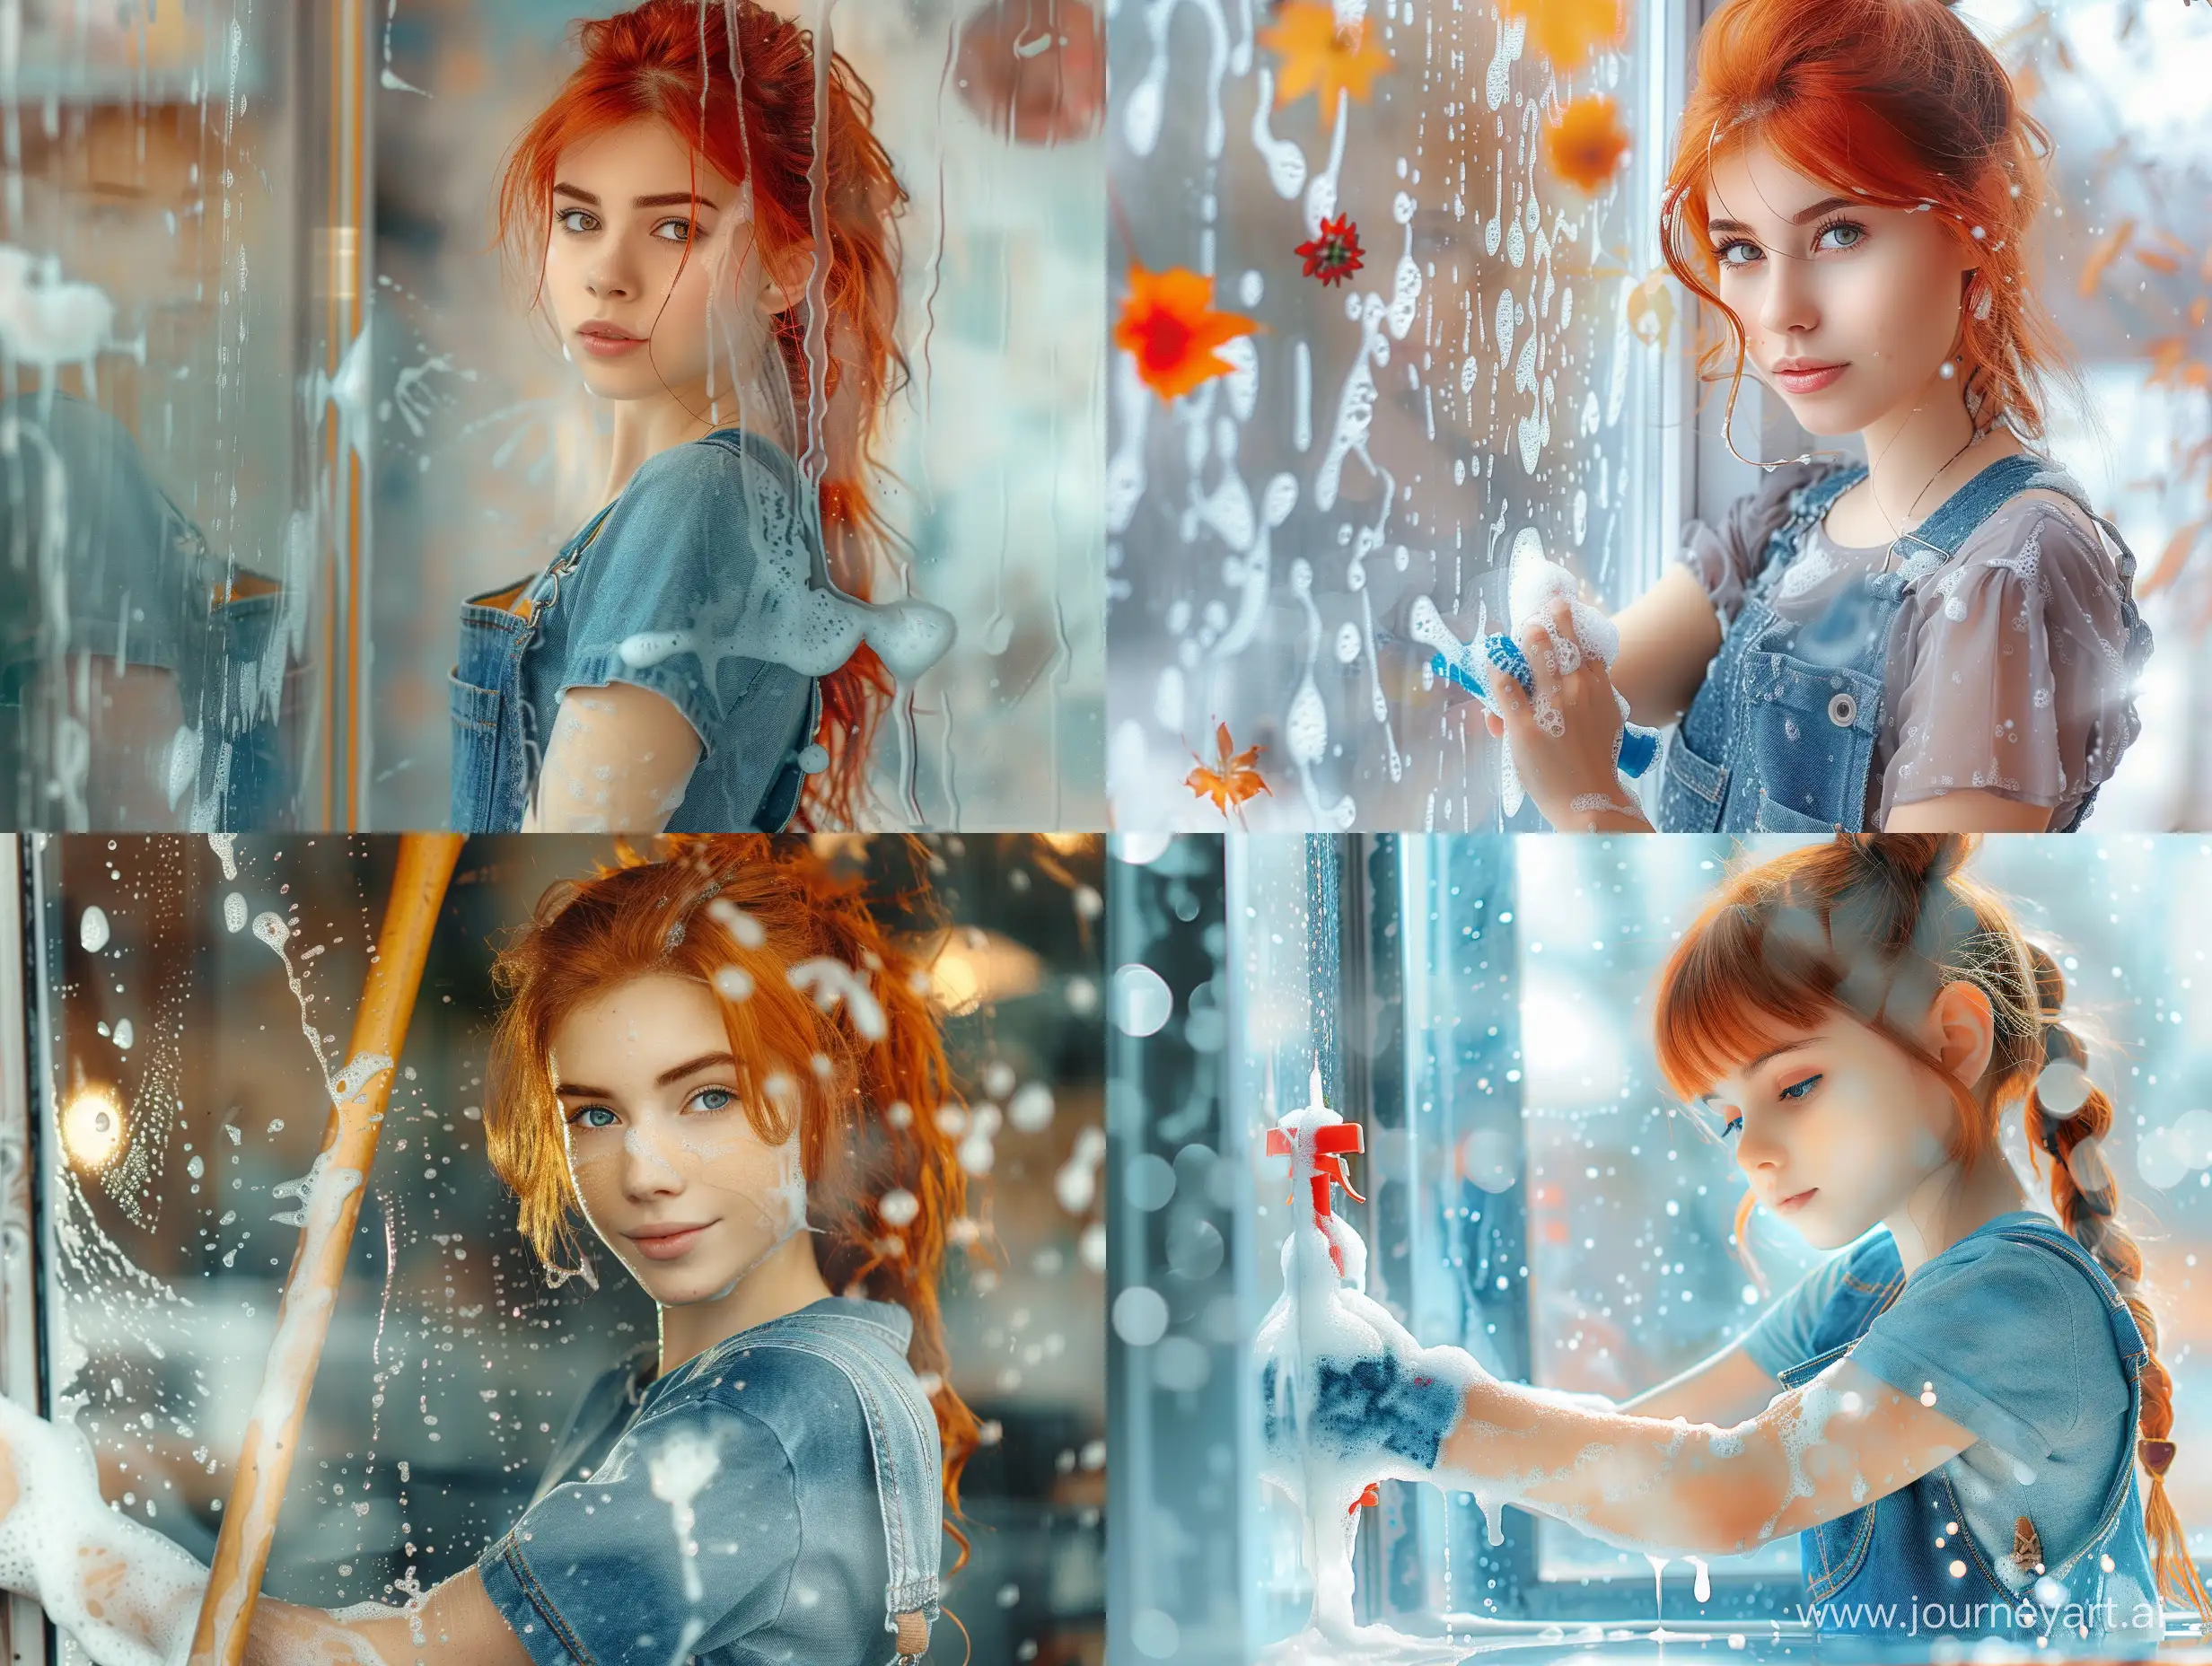 RedHaired-Girl-Washing-Windows-in-Overalls-with-Special-Detergent